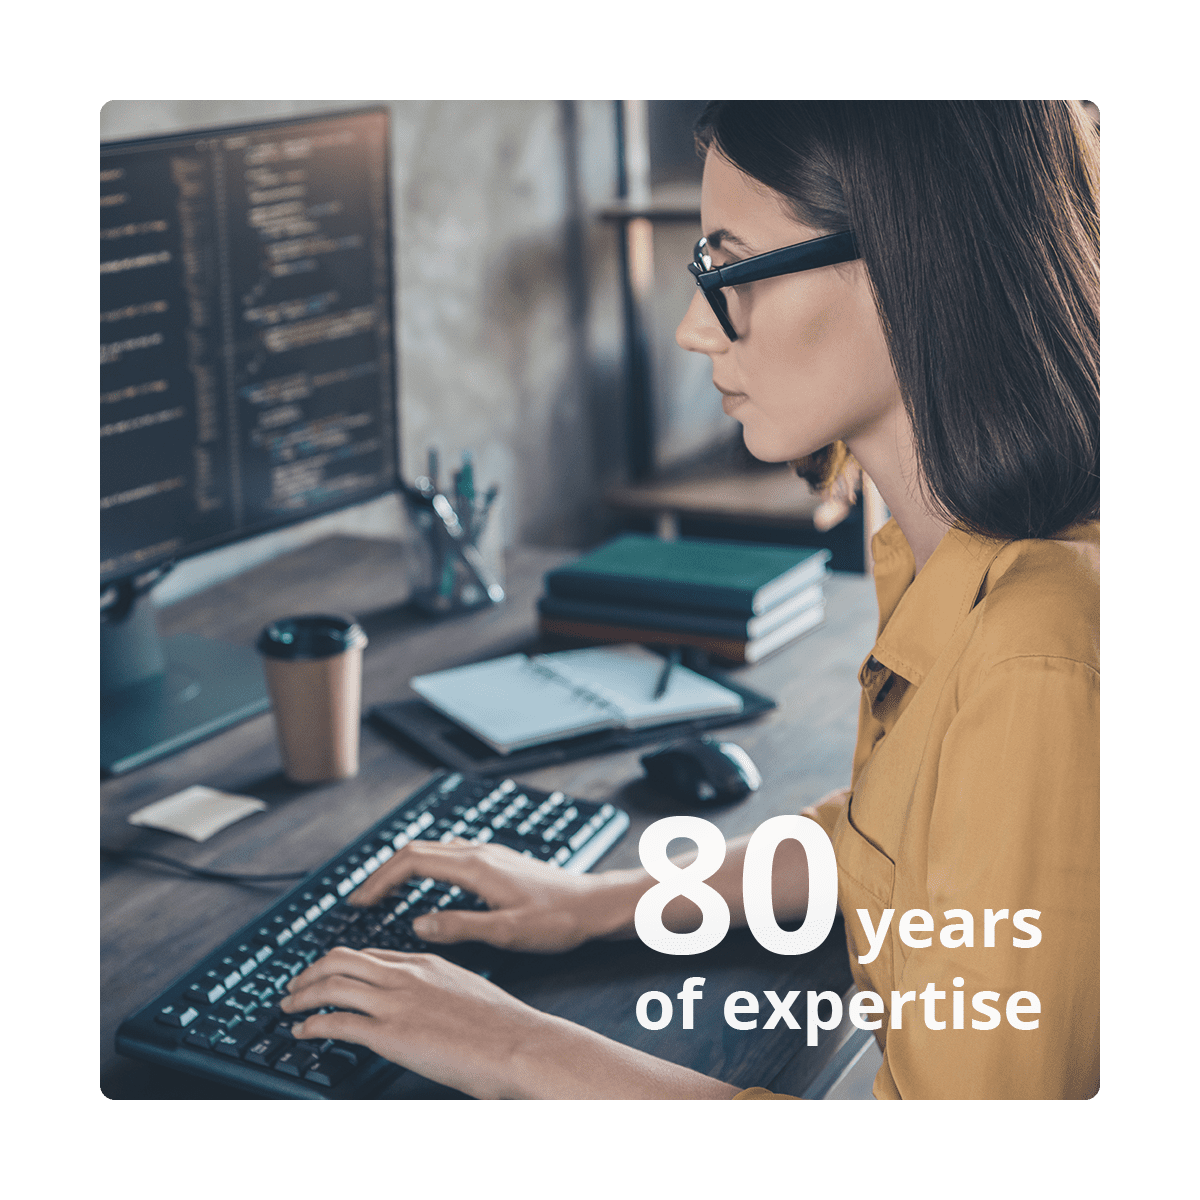 woman typing, and the text "80 years of expertise"